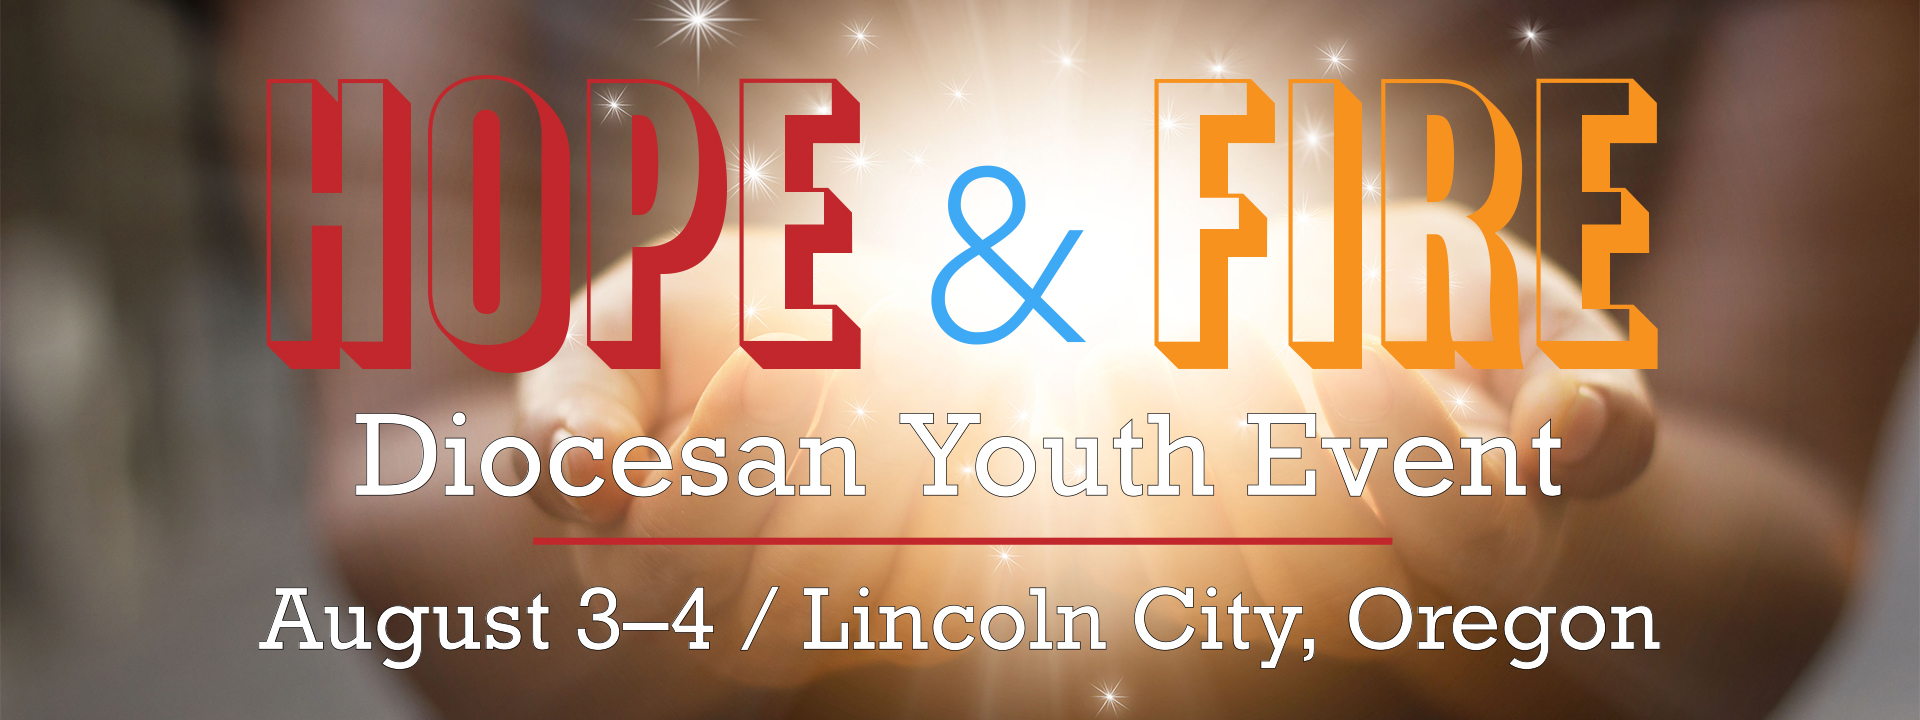 Hope and Fire Diocesan Youth Event Episcopal Church in Western Oregon